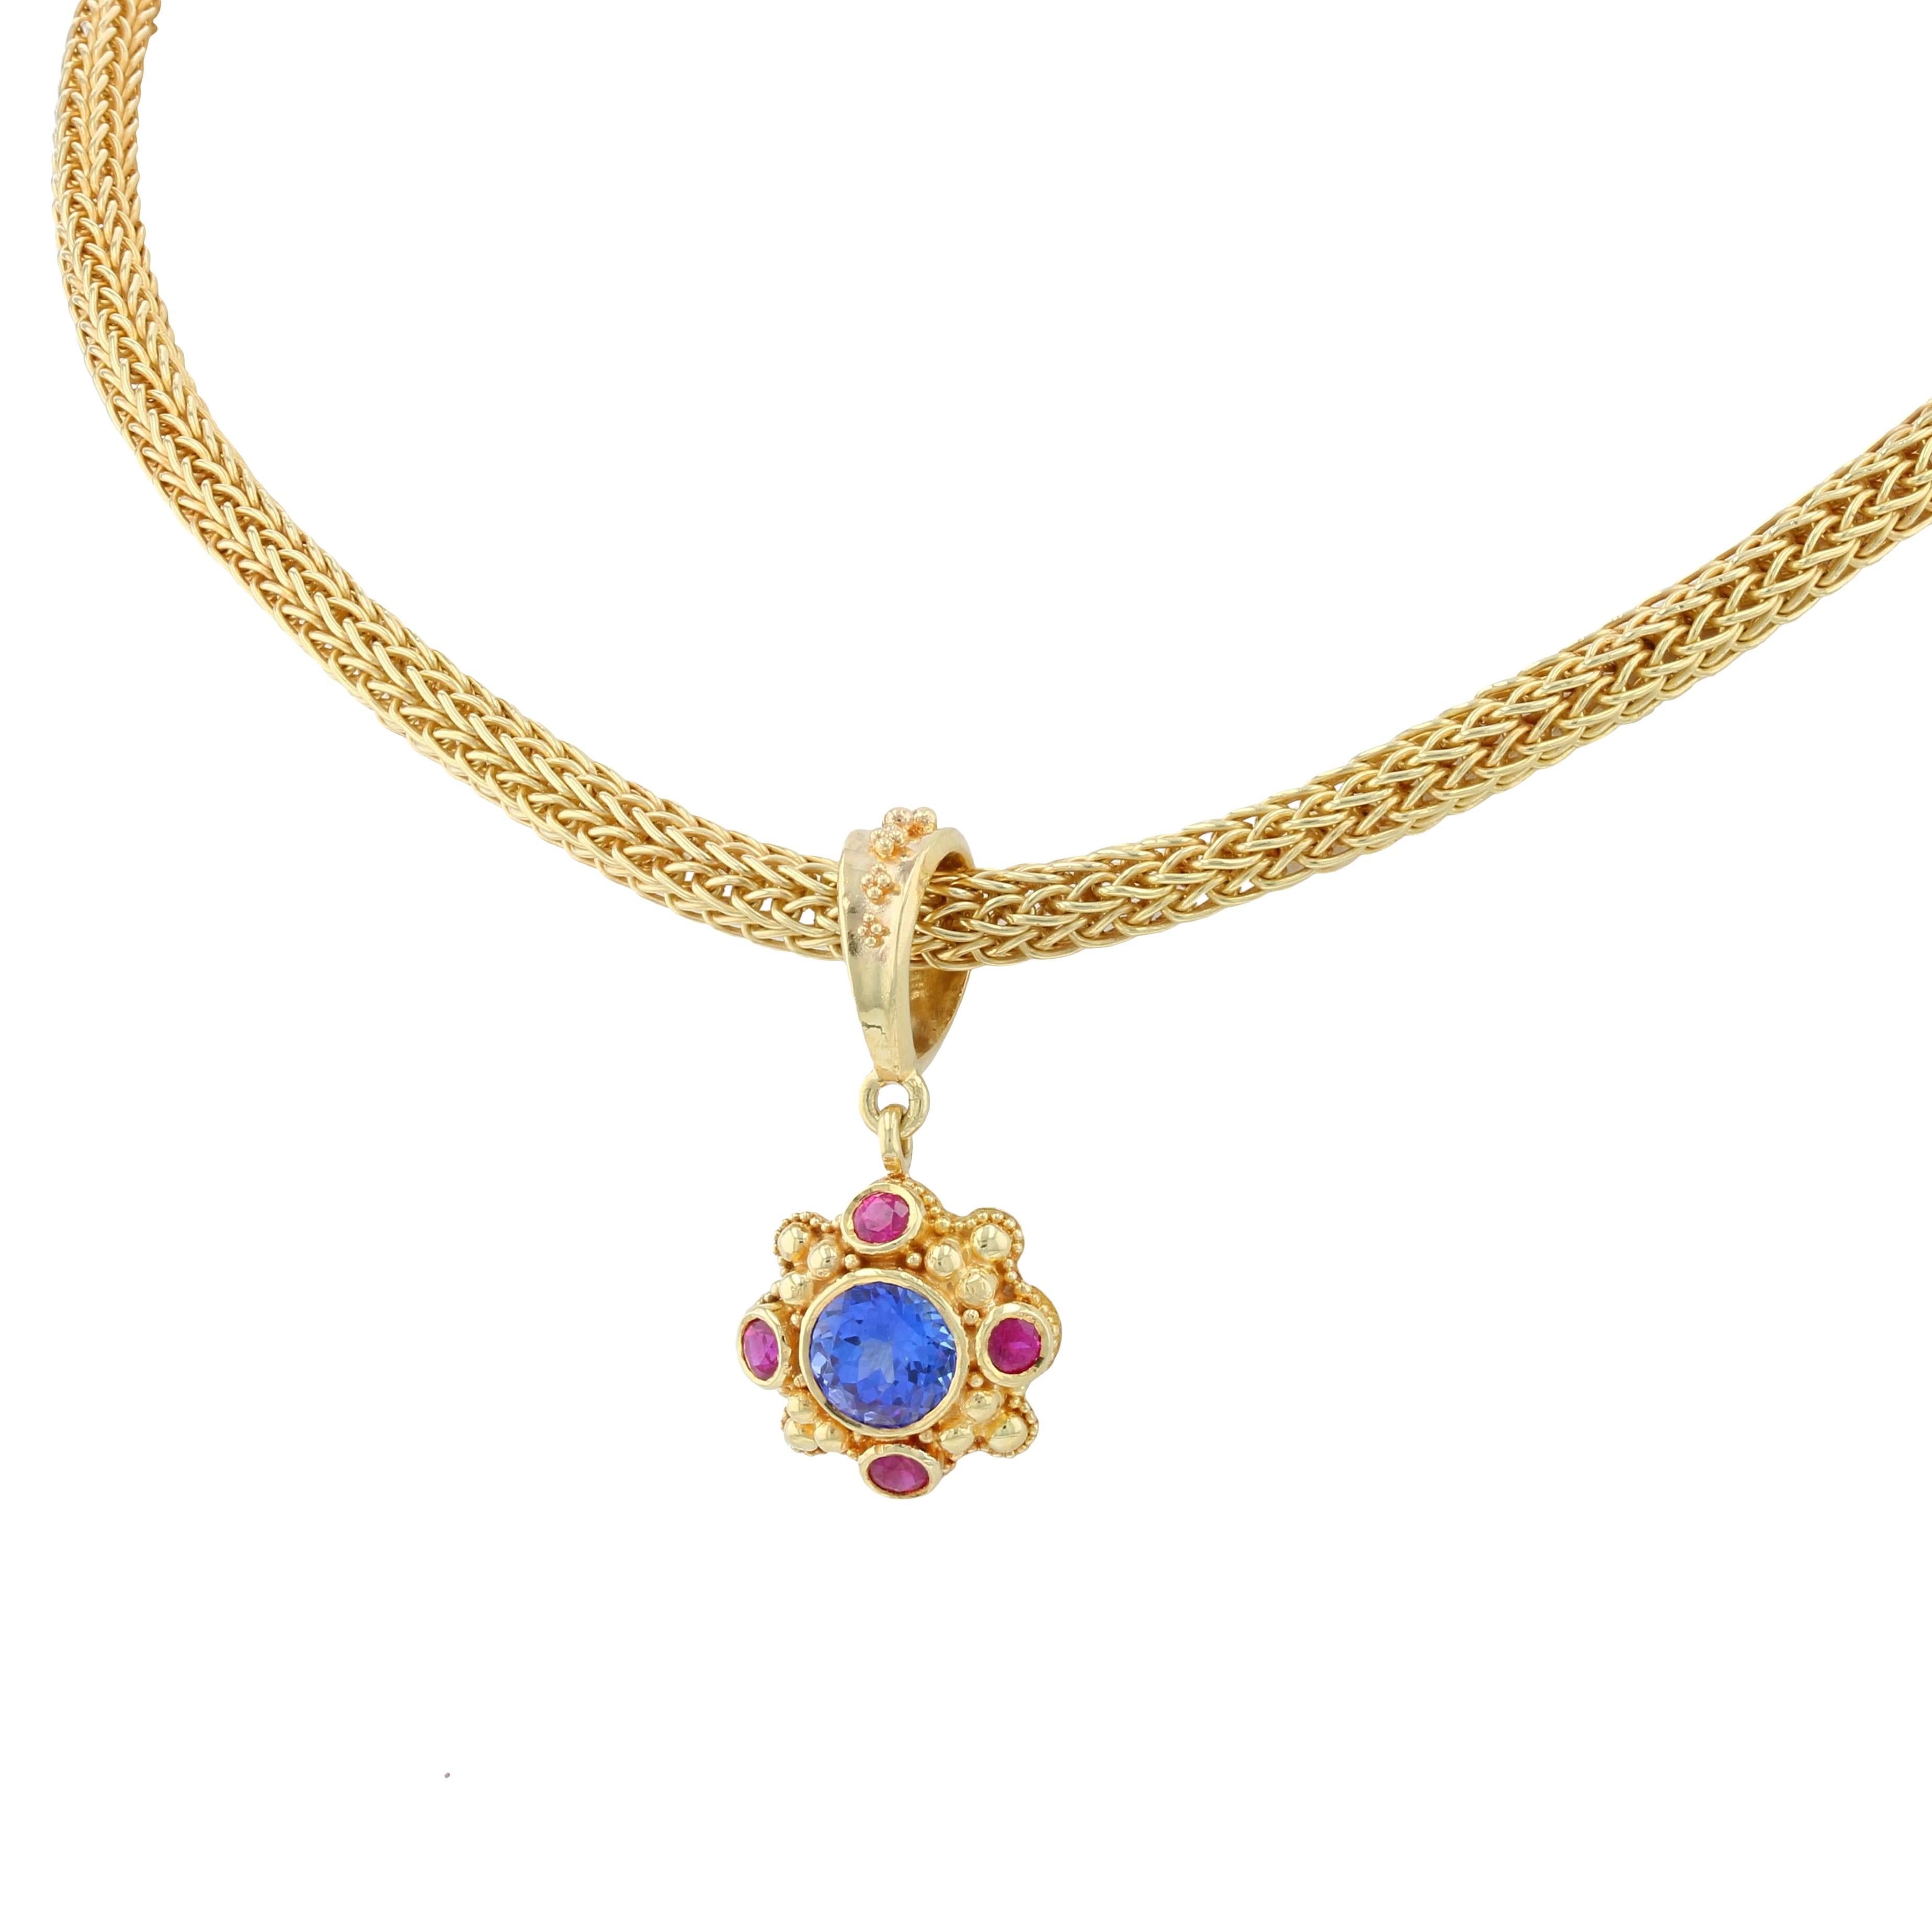 From the Kent Raible limited edition 'Studio Collection' we have this gemmy Pendant in the deep rich colors you only get with Tanzanite and Ruby! Raible has focused on making those gems pop with just his gold granulation as the frame creating a